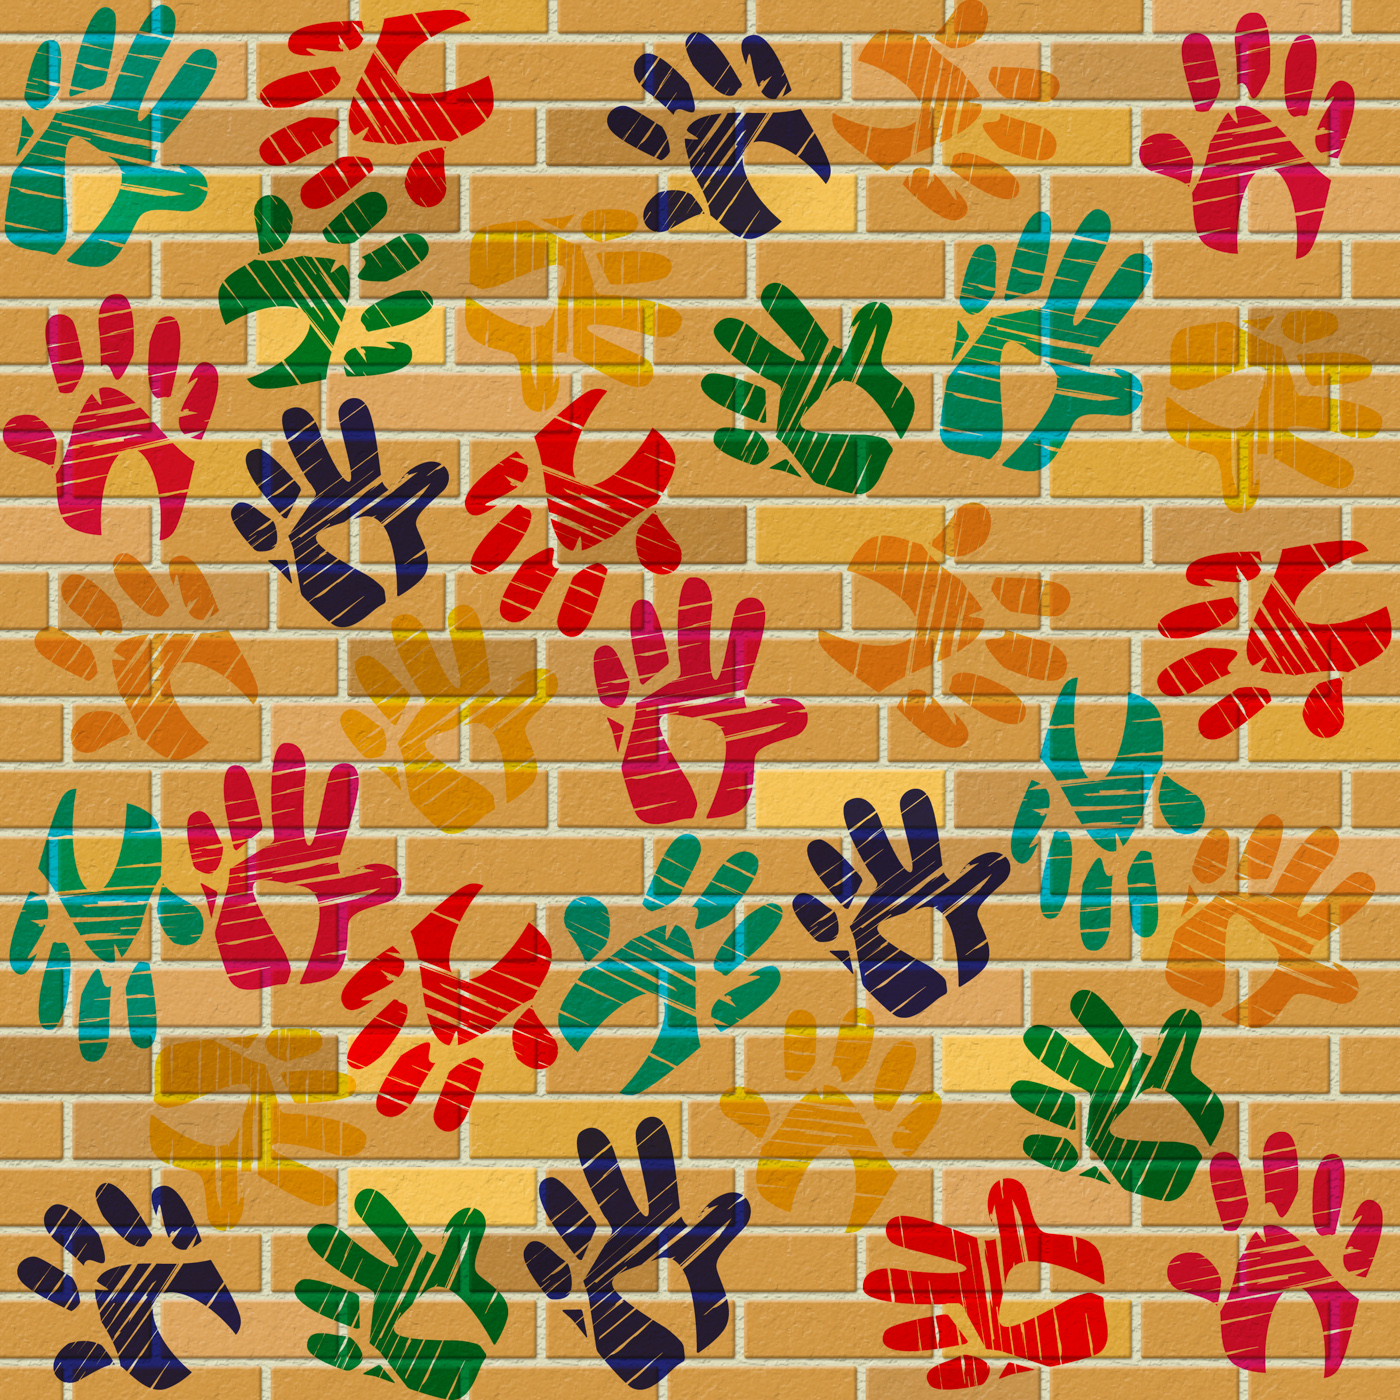 Brick wall indicates multicolored painted and design photo